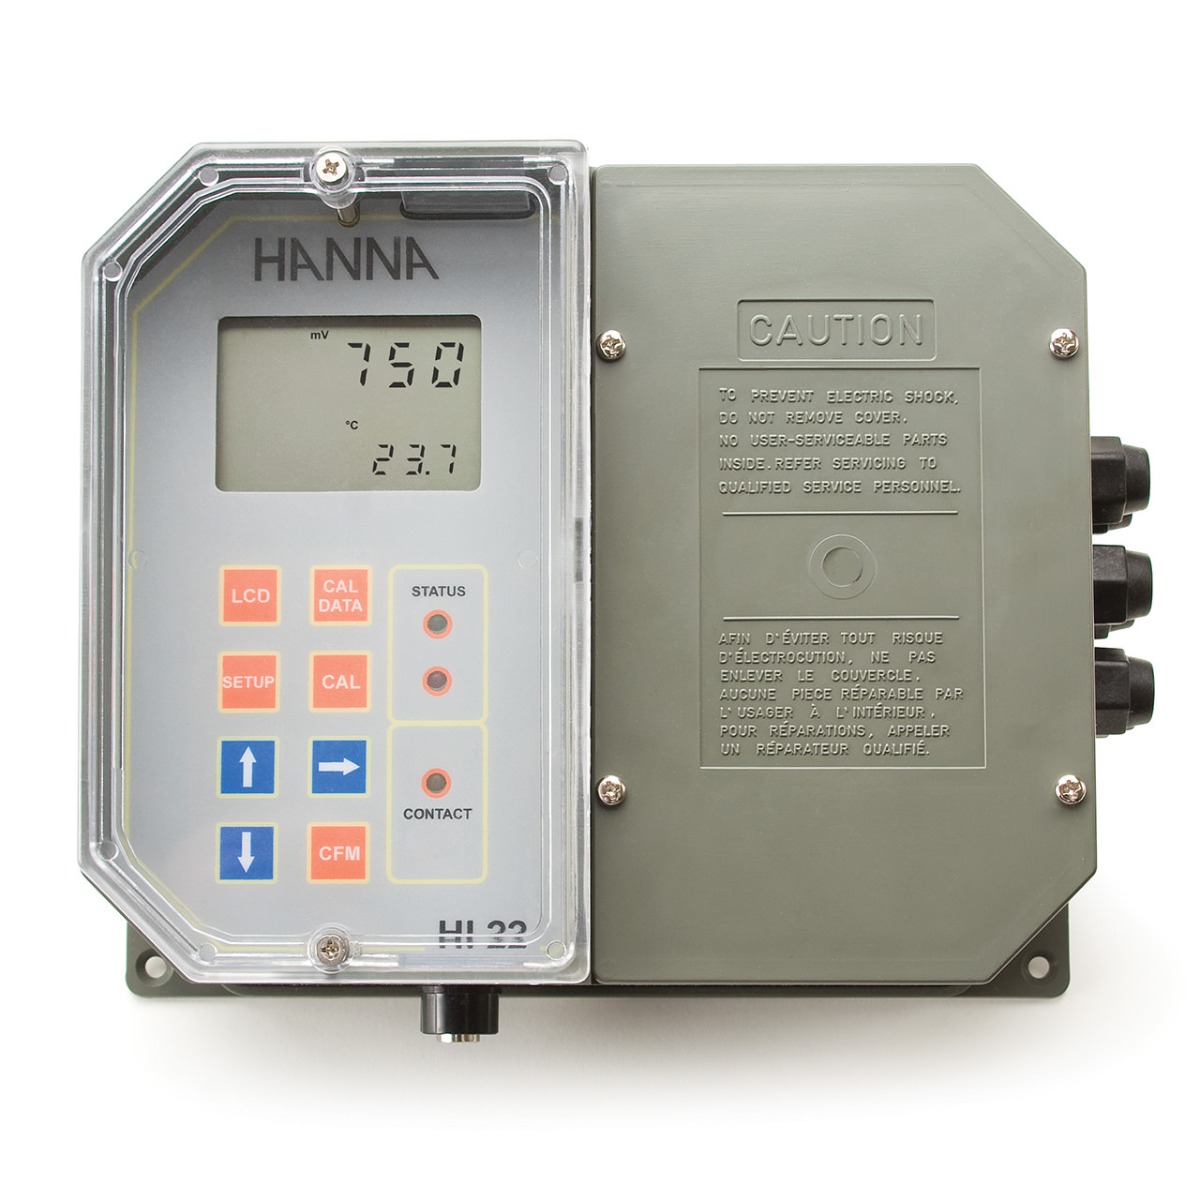 HI22111-2 Wall Mounted ORP Digital Controller with Single Setpoint and Matching Pin 